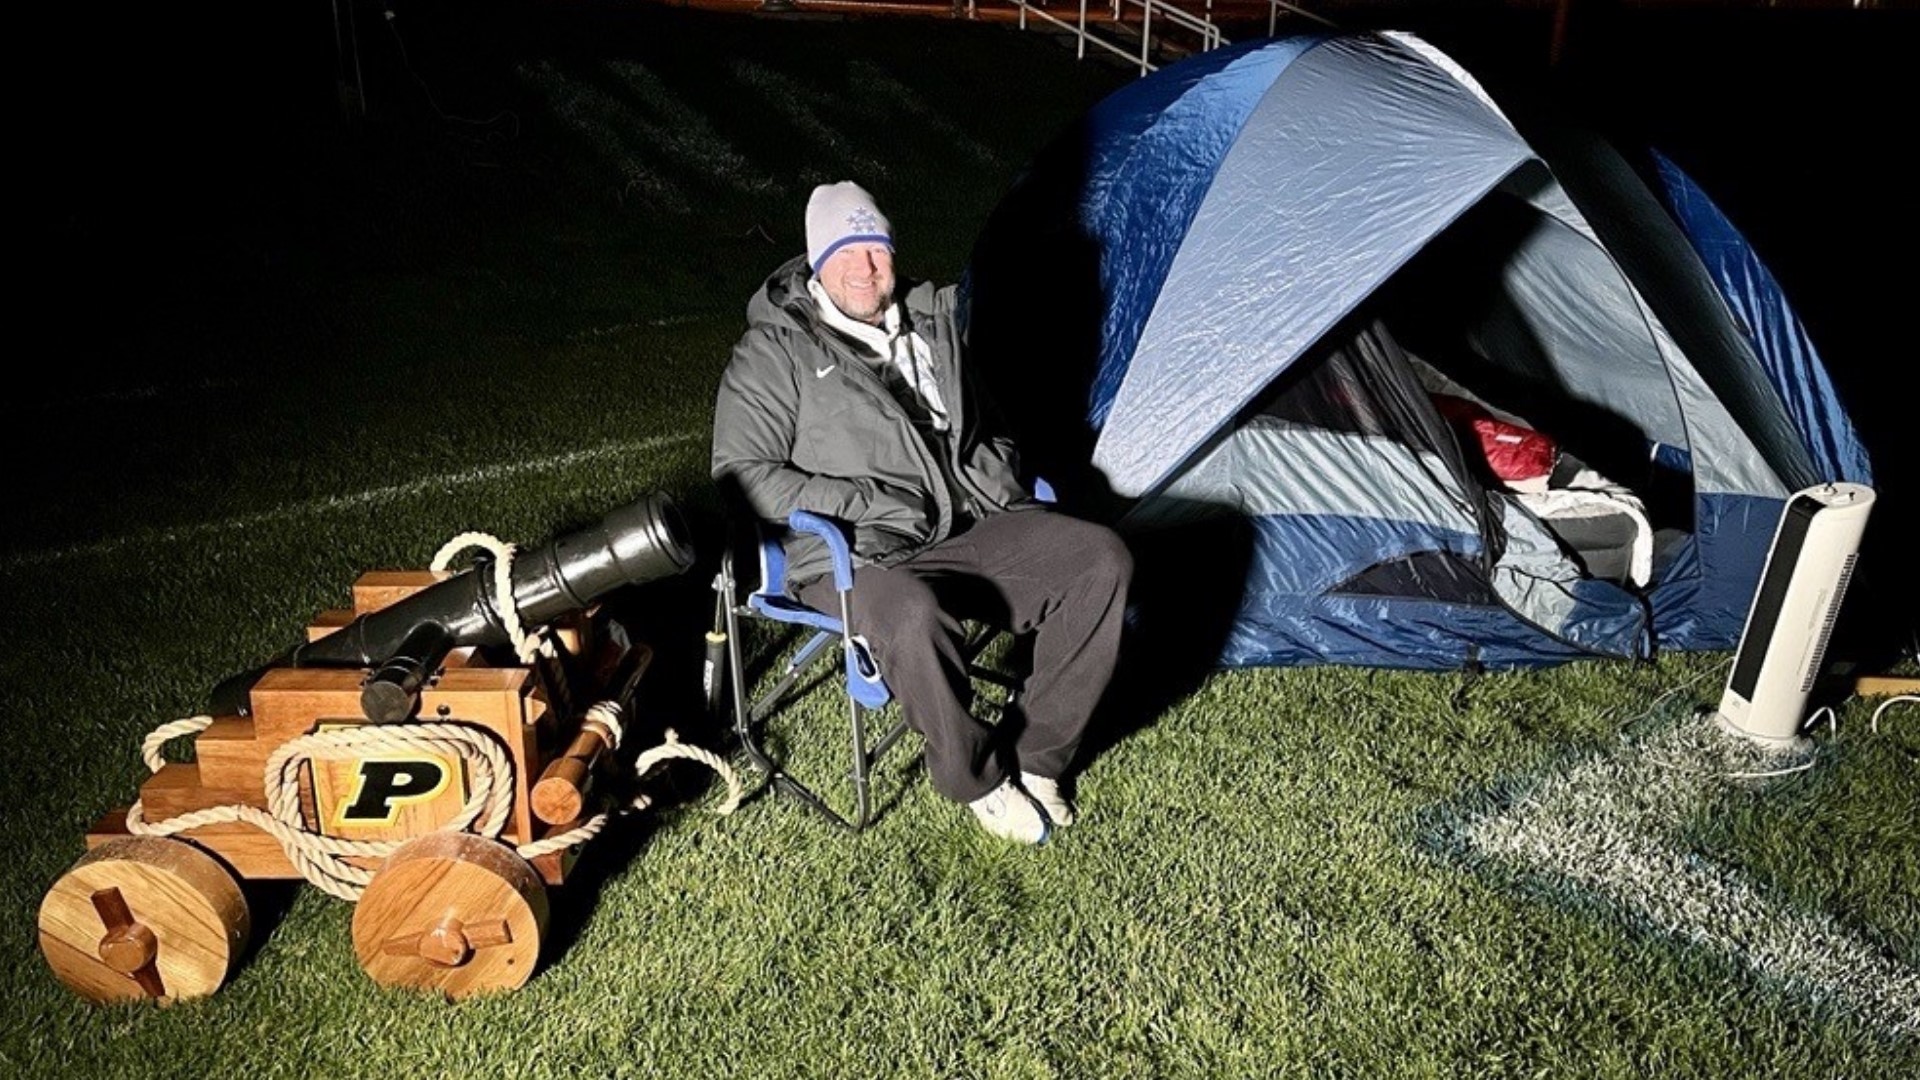 A tradition he started when he was hired in 2016, Andy Brungard pitched a tent at Schaller Stadium and camped out for the night after beating the Yellow Jackets.